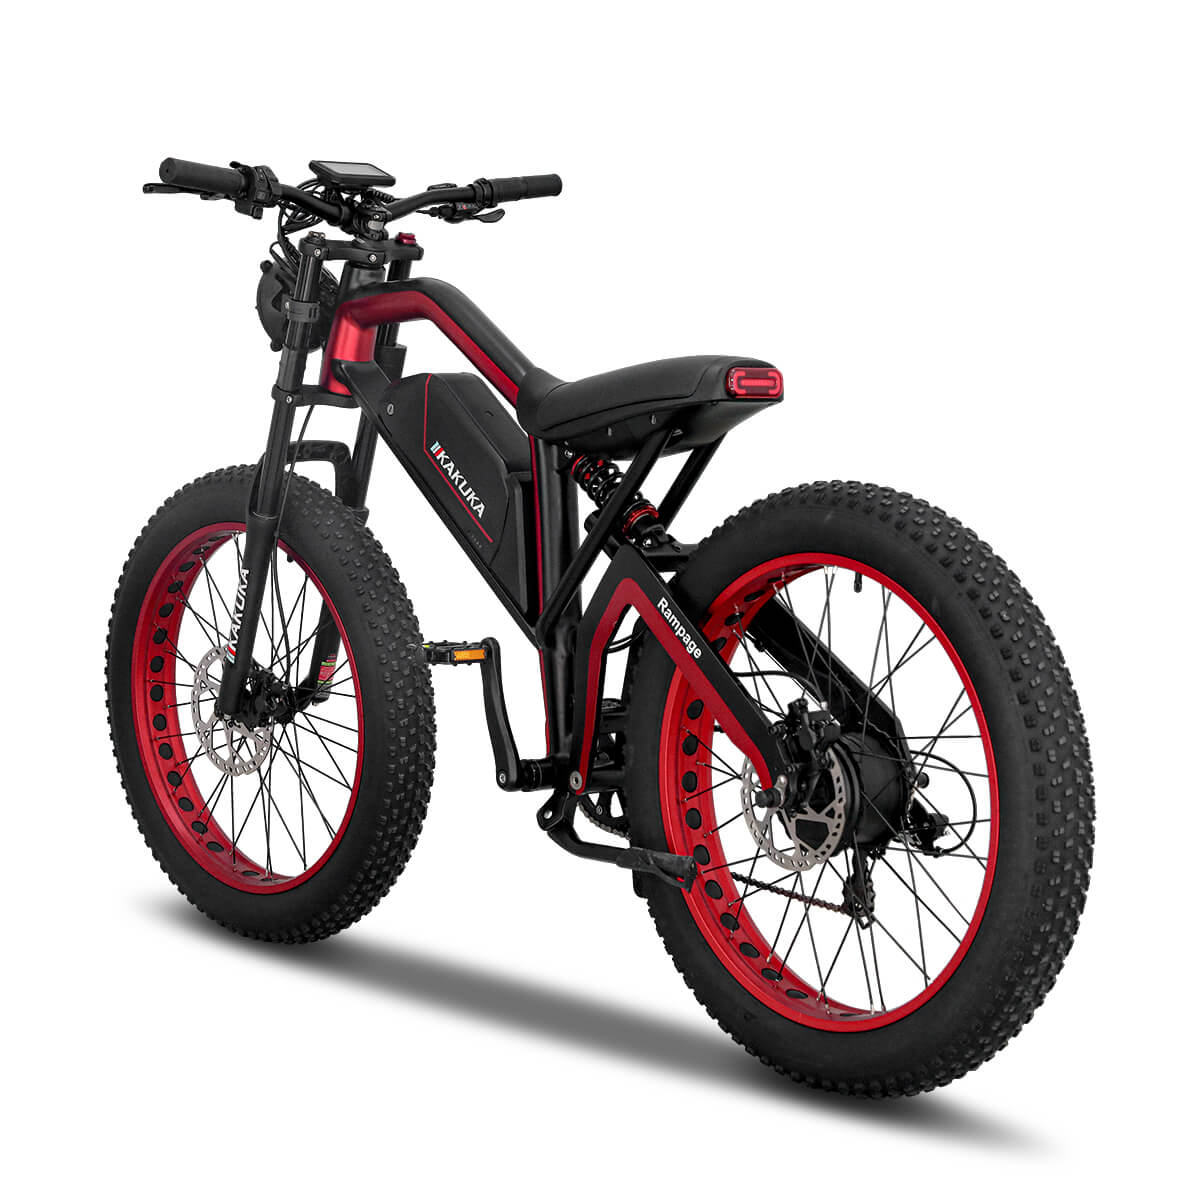 Kakuka Rampage Fat Tire Electric Bike with 750W bafang motor and sumsung bettary